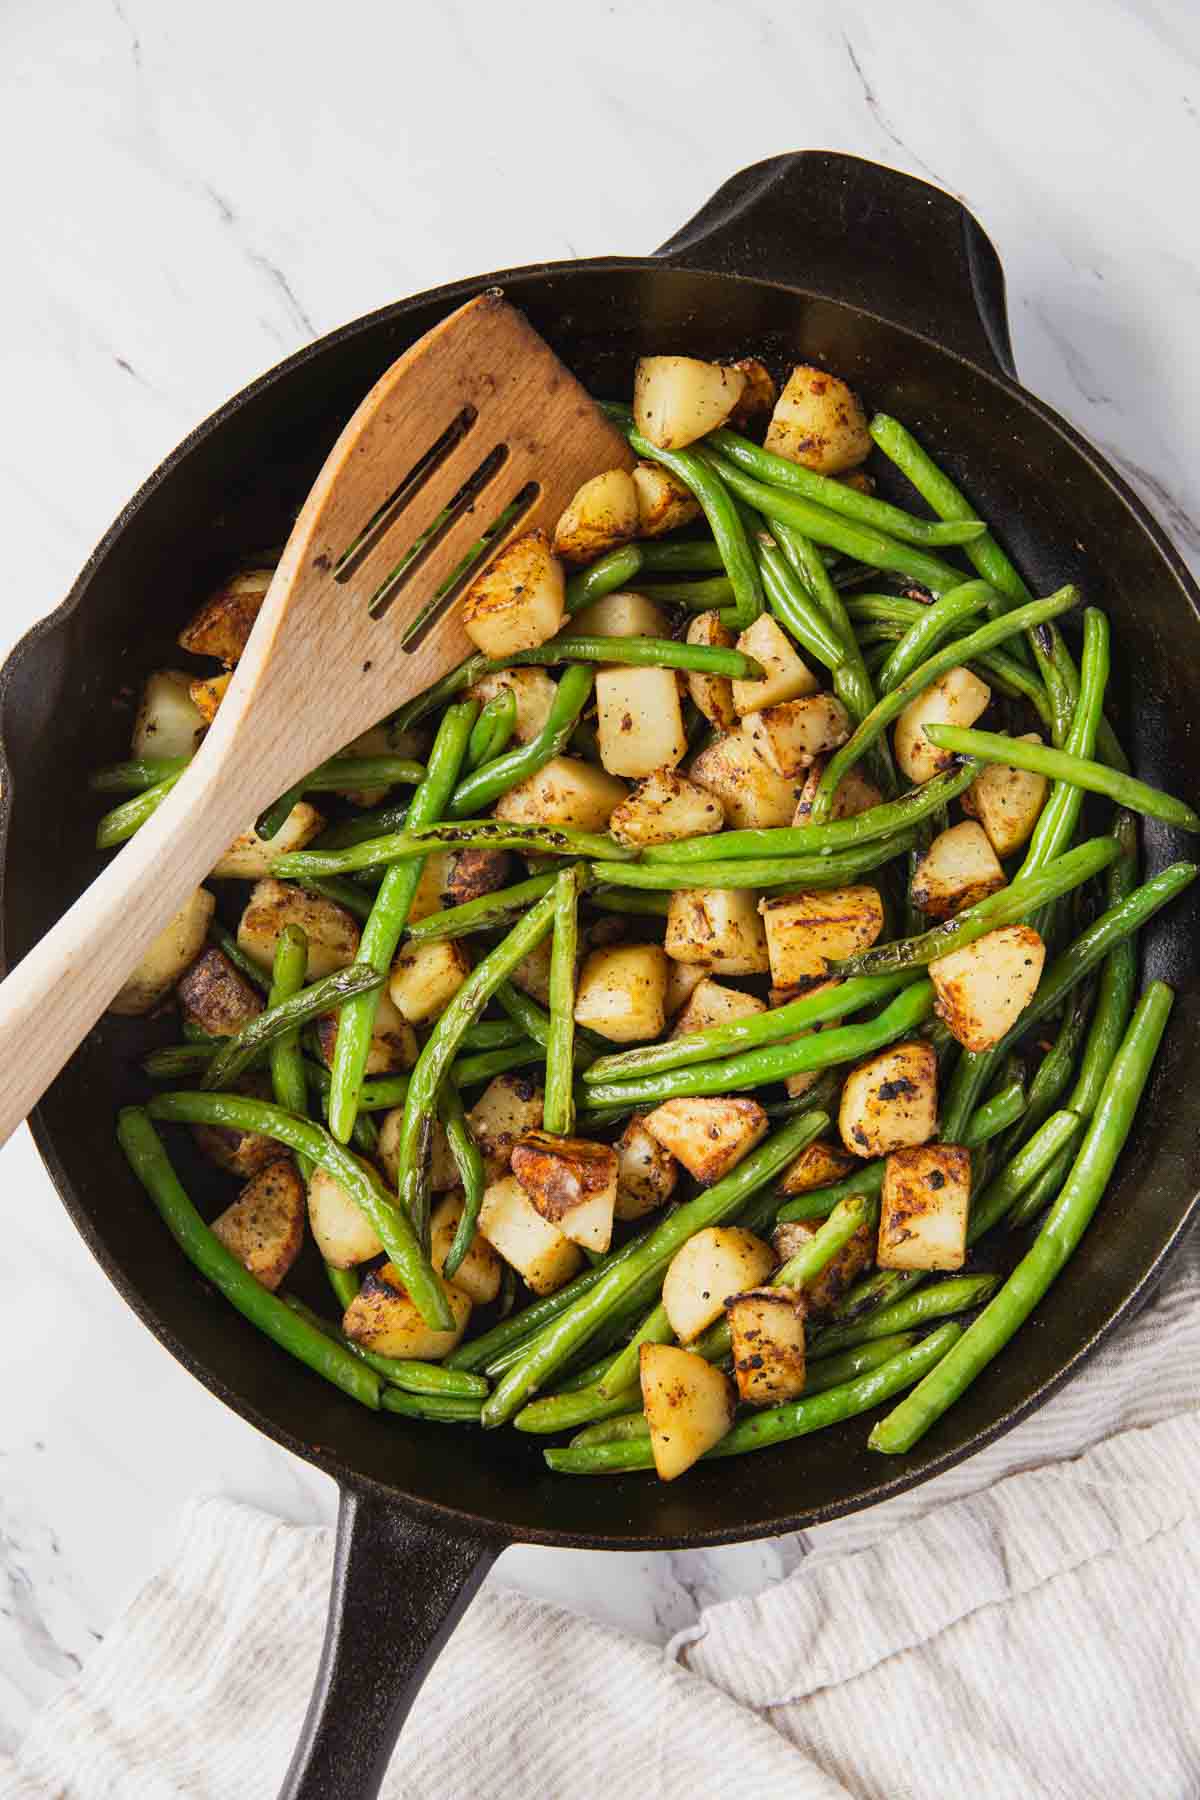 Roasted green beans and potatoes in a cast iron pan with a wooden spatula.